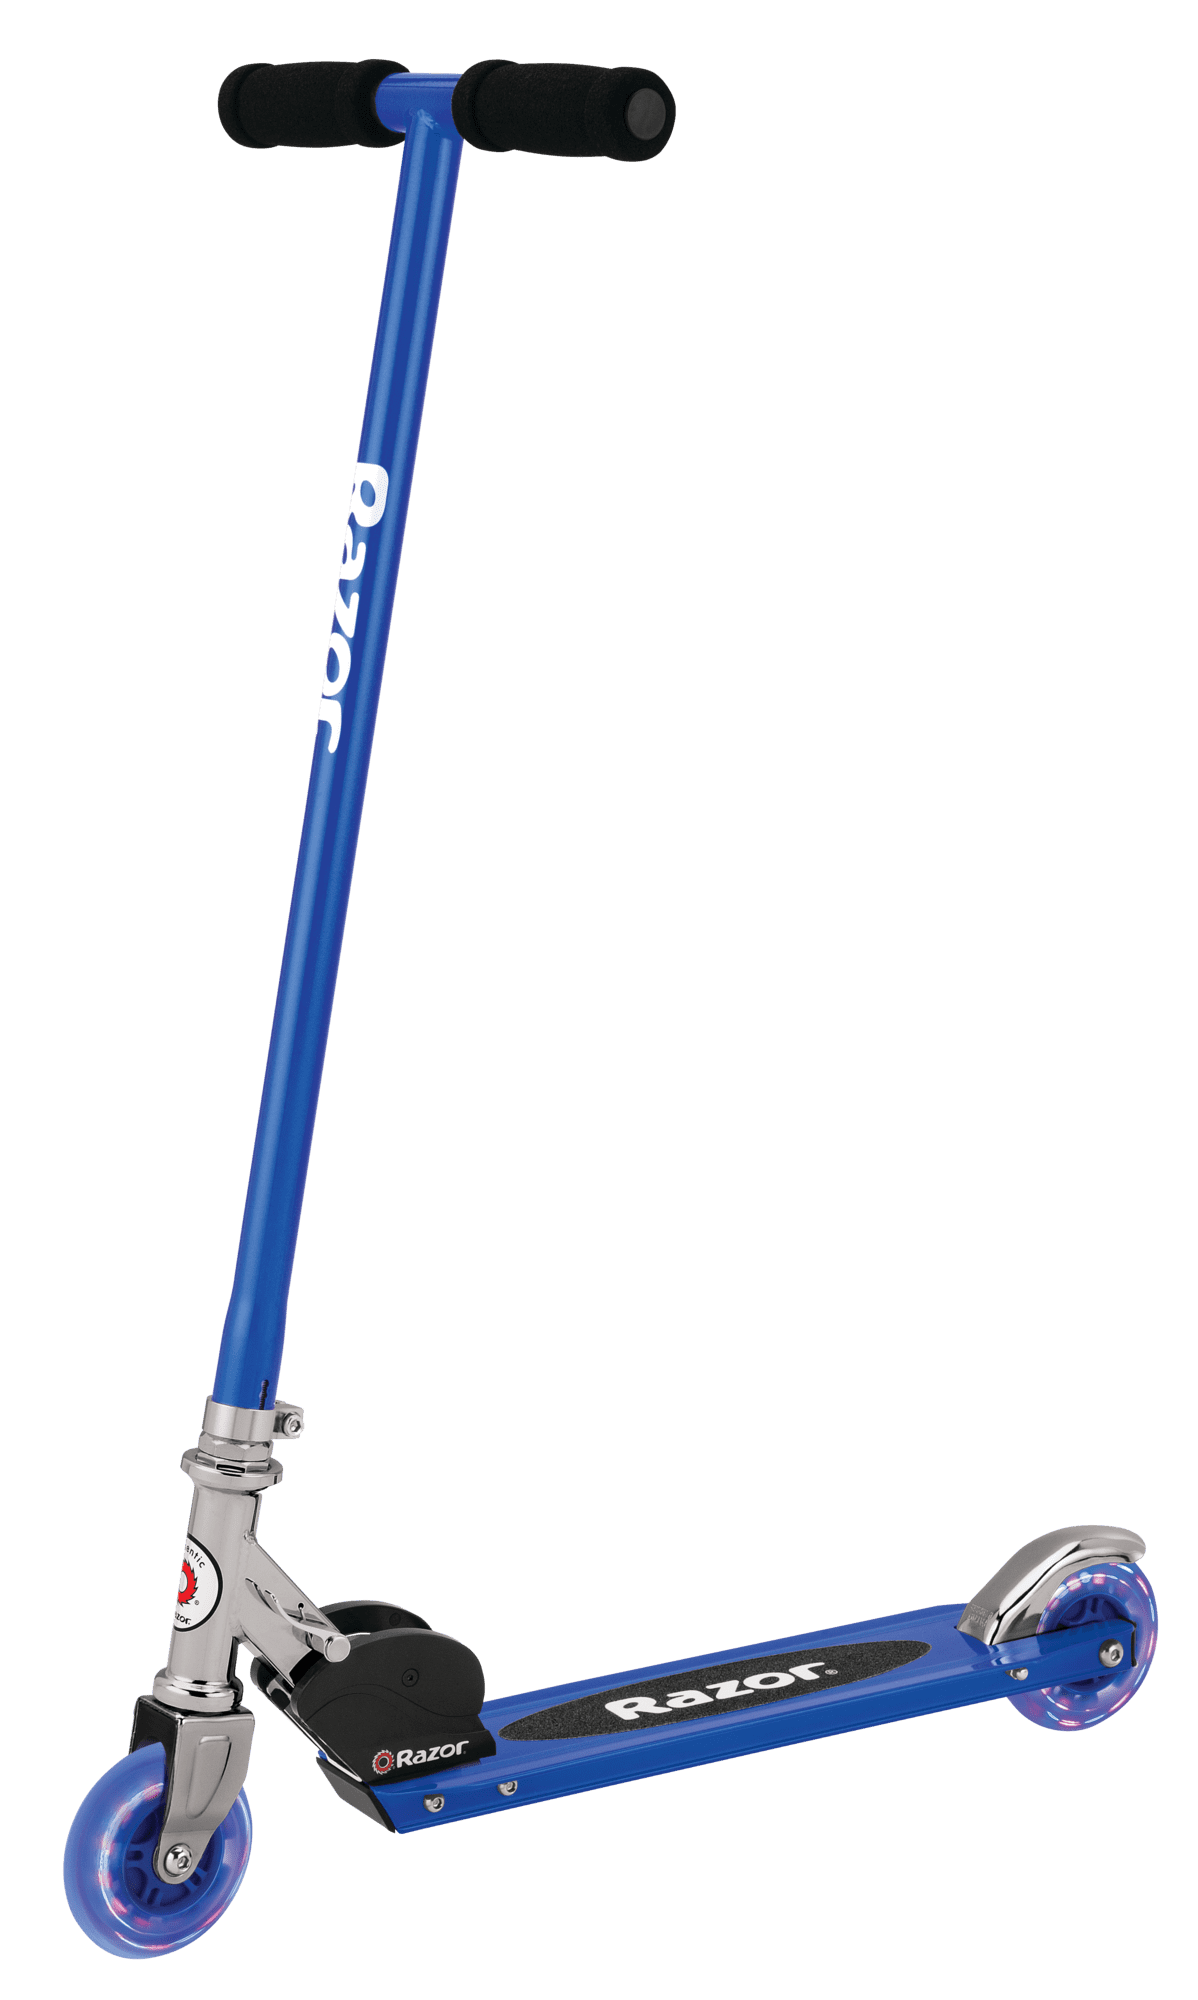 Razor S Folding Kick Scooter with Light-Up Wheel - Blue, Ages 5+ and Riders Up to 110 lbs